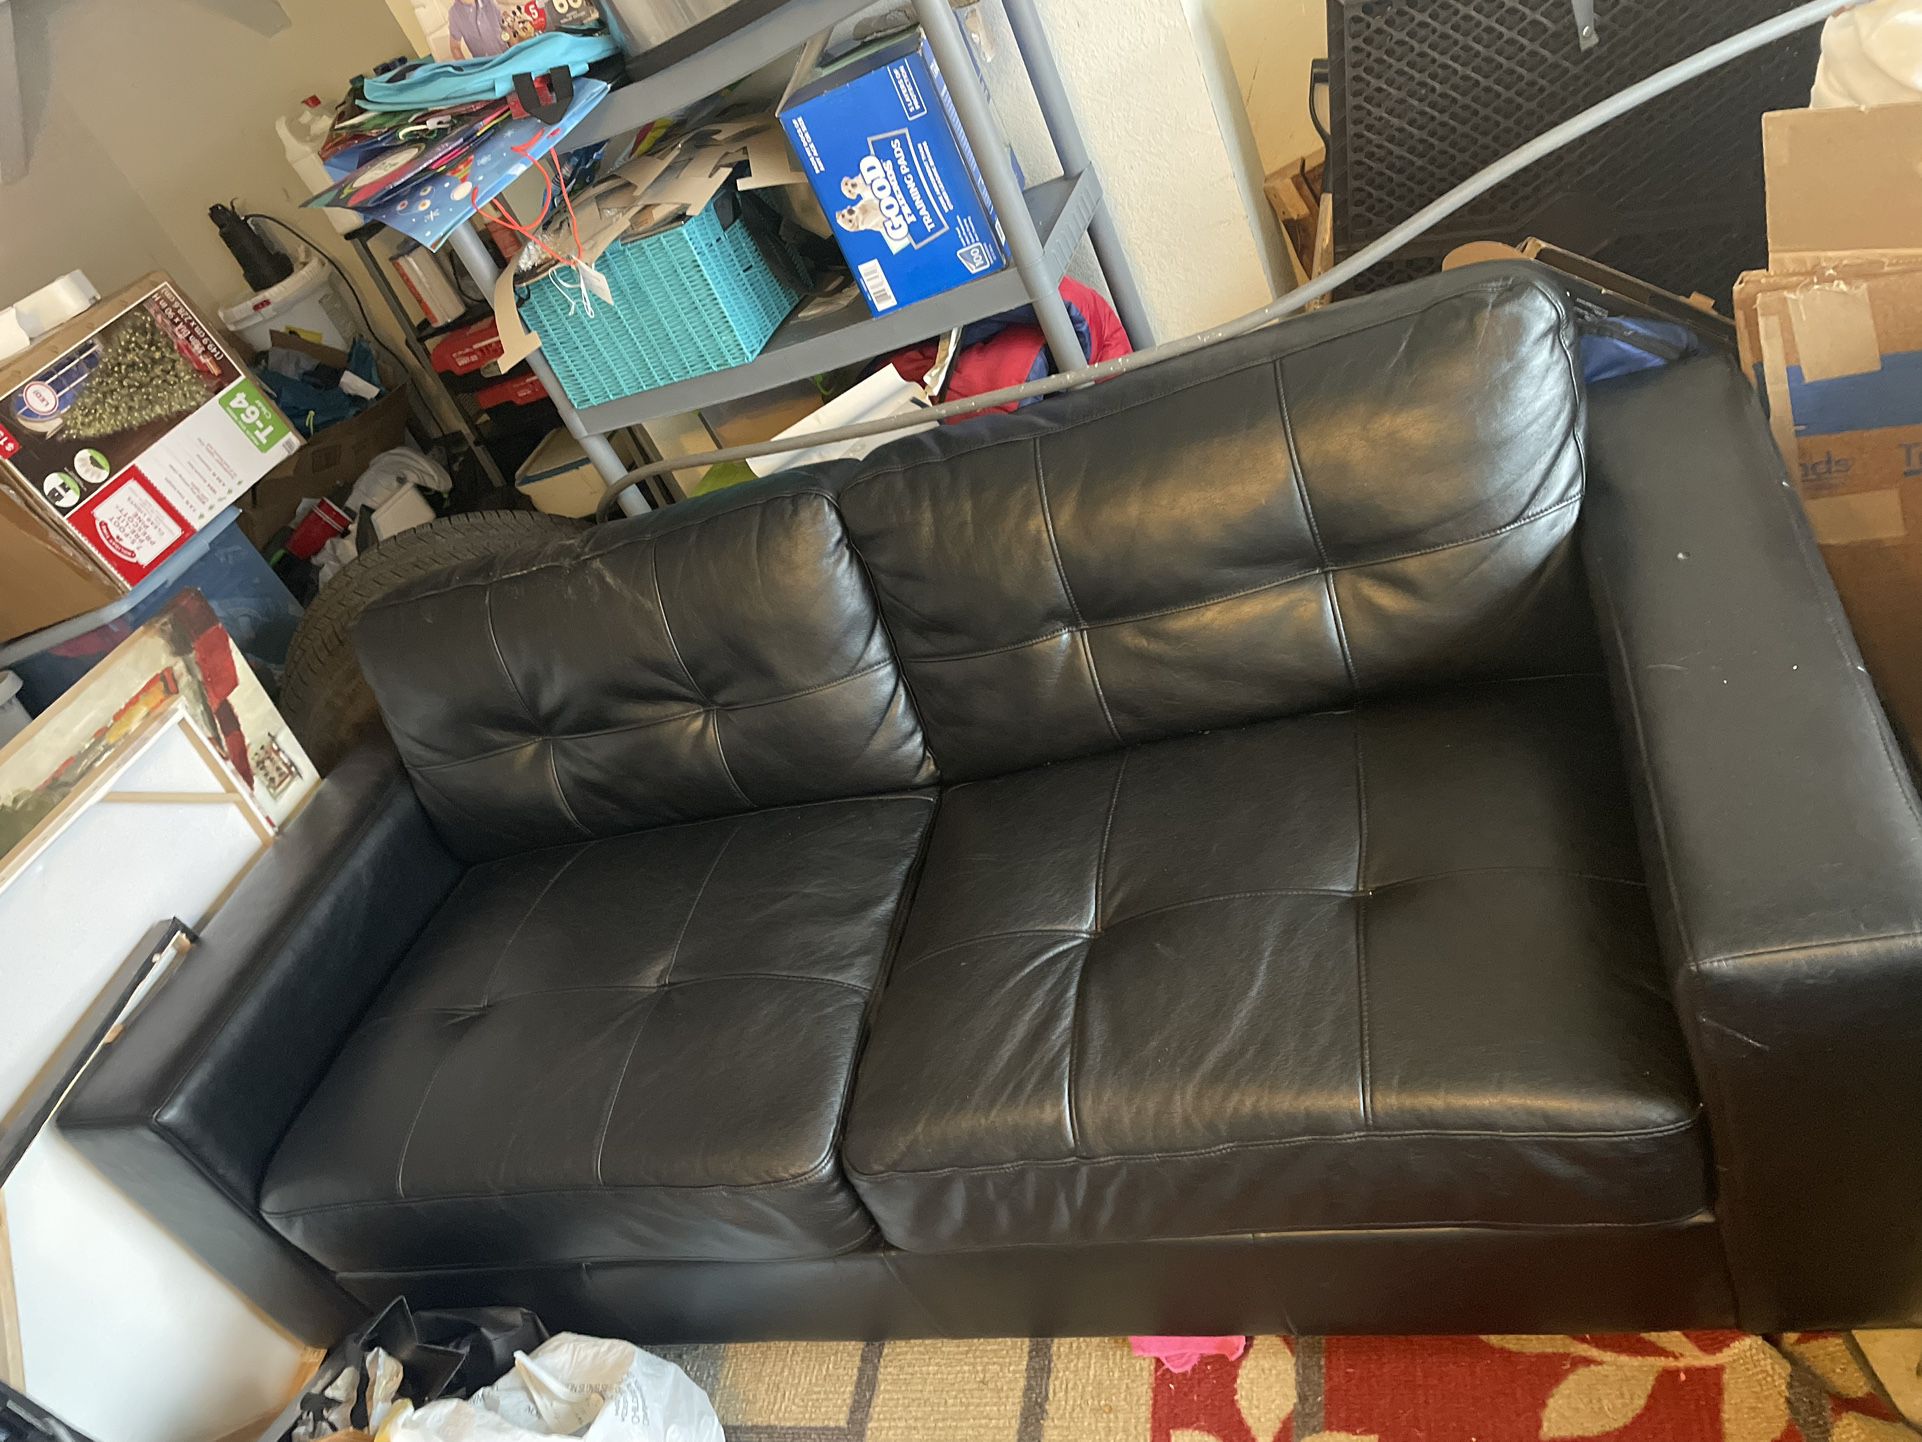 Black Leather Couches 